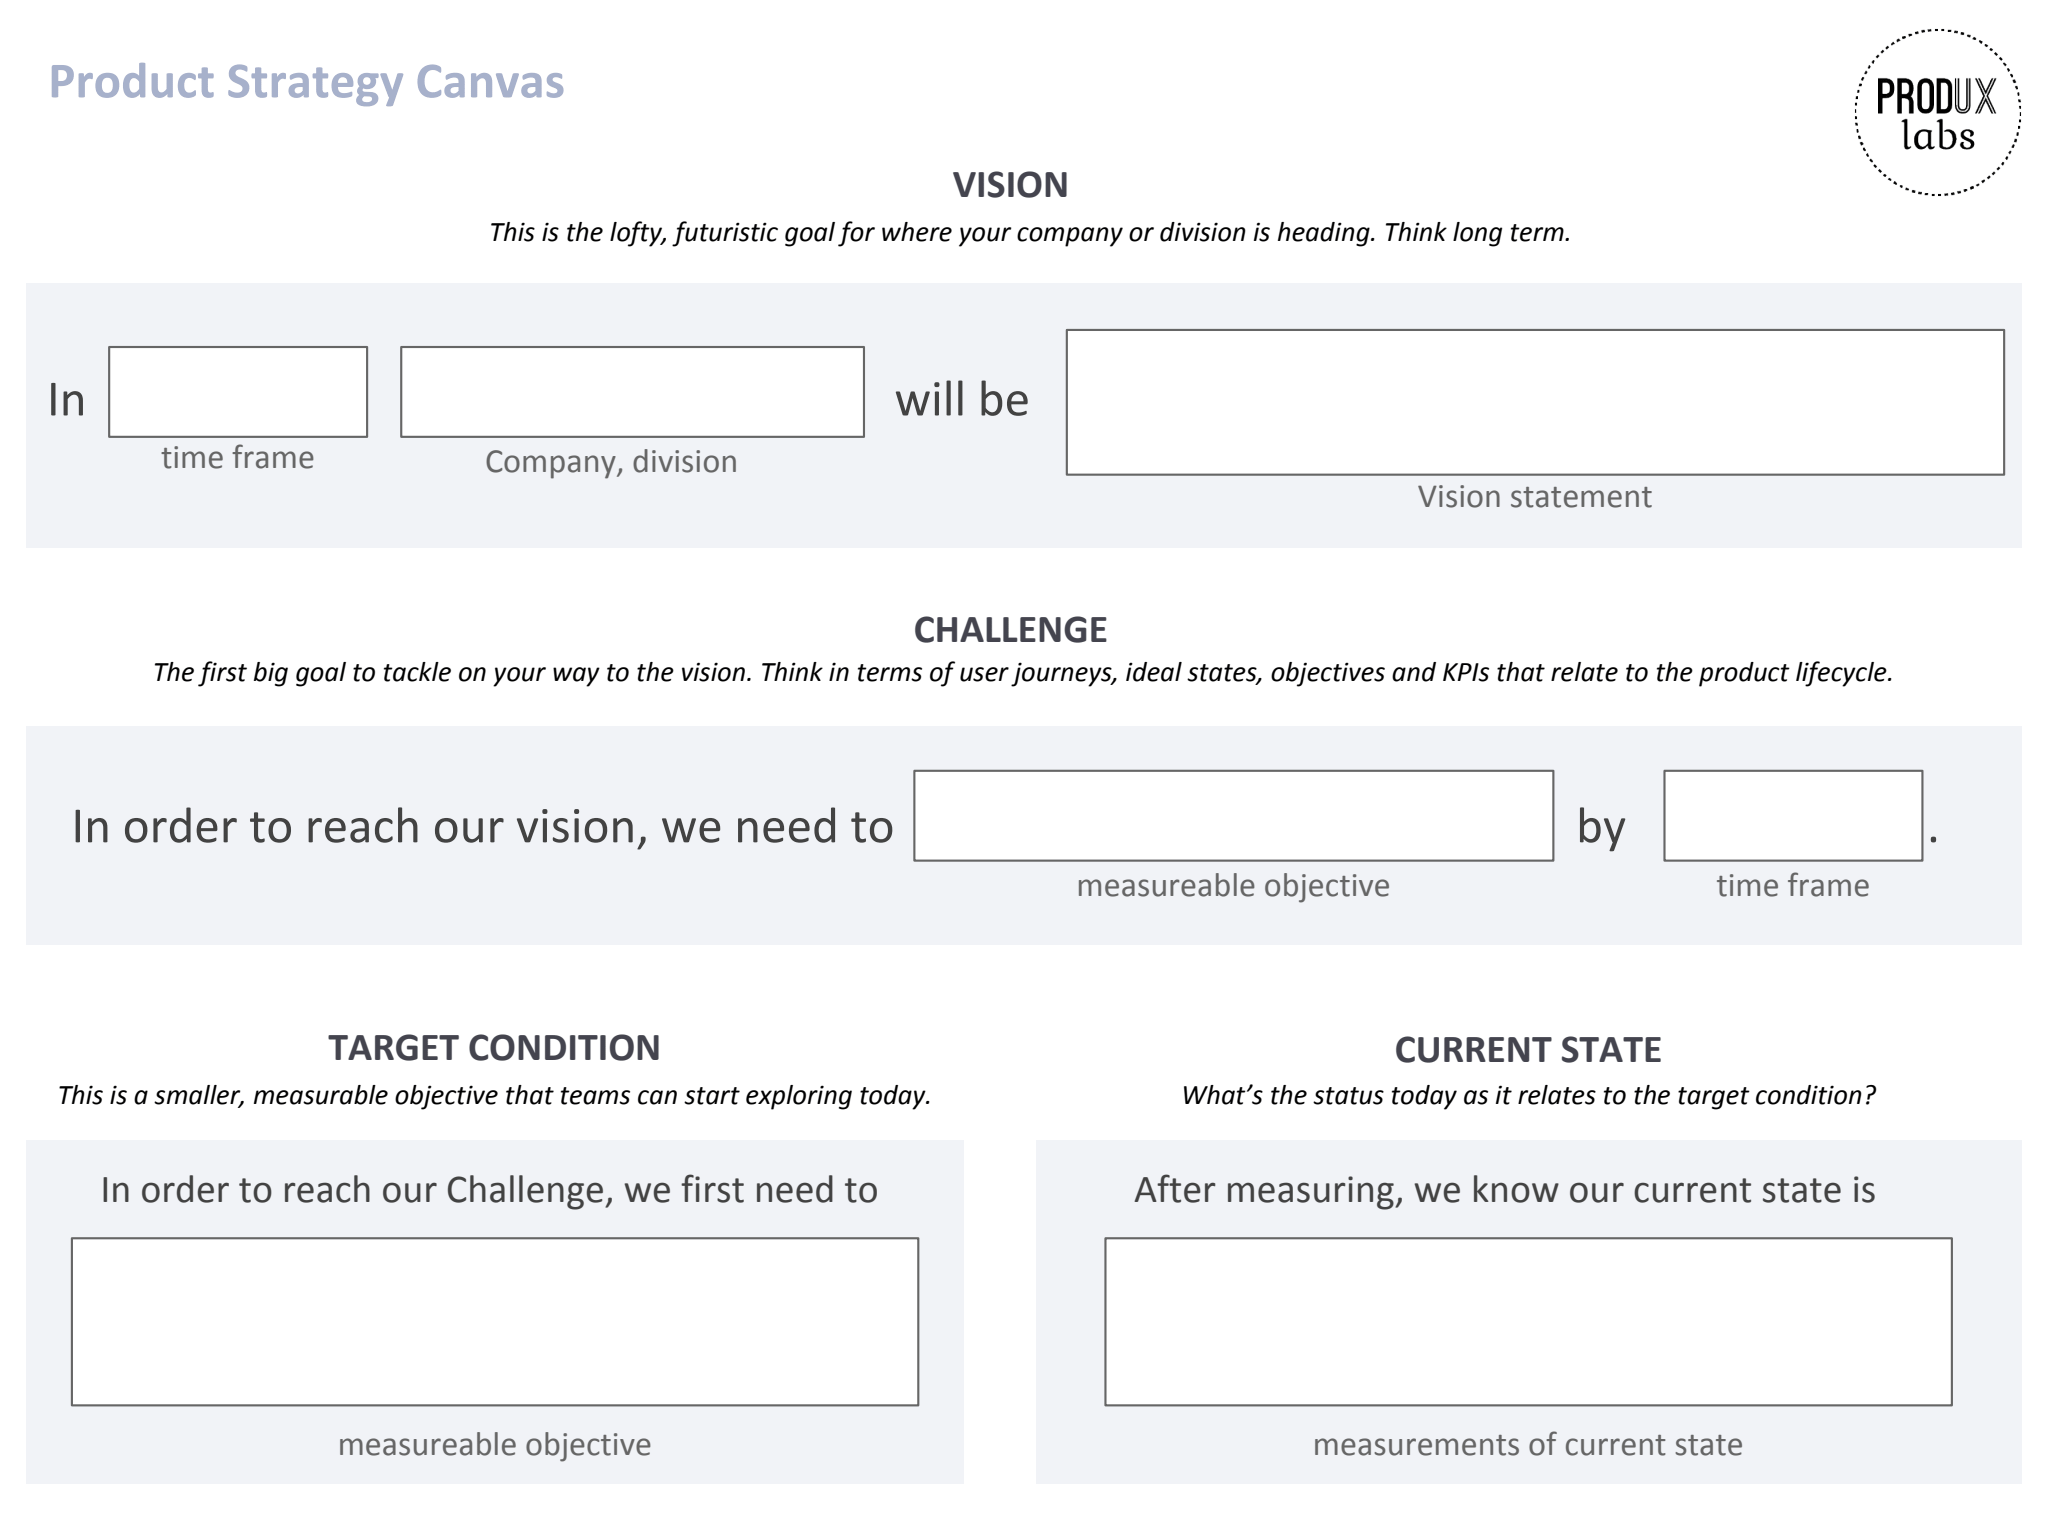 A product strategy canvas by Melissa Perri